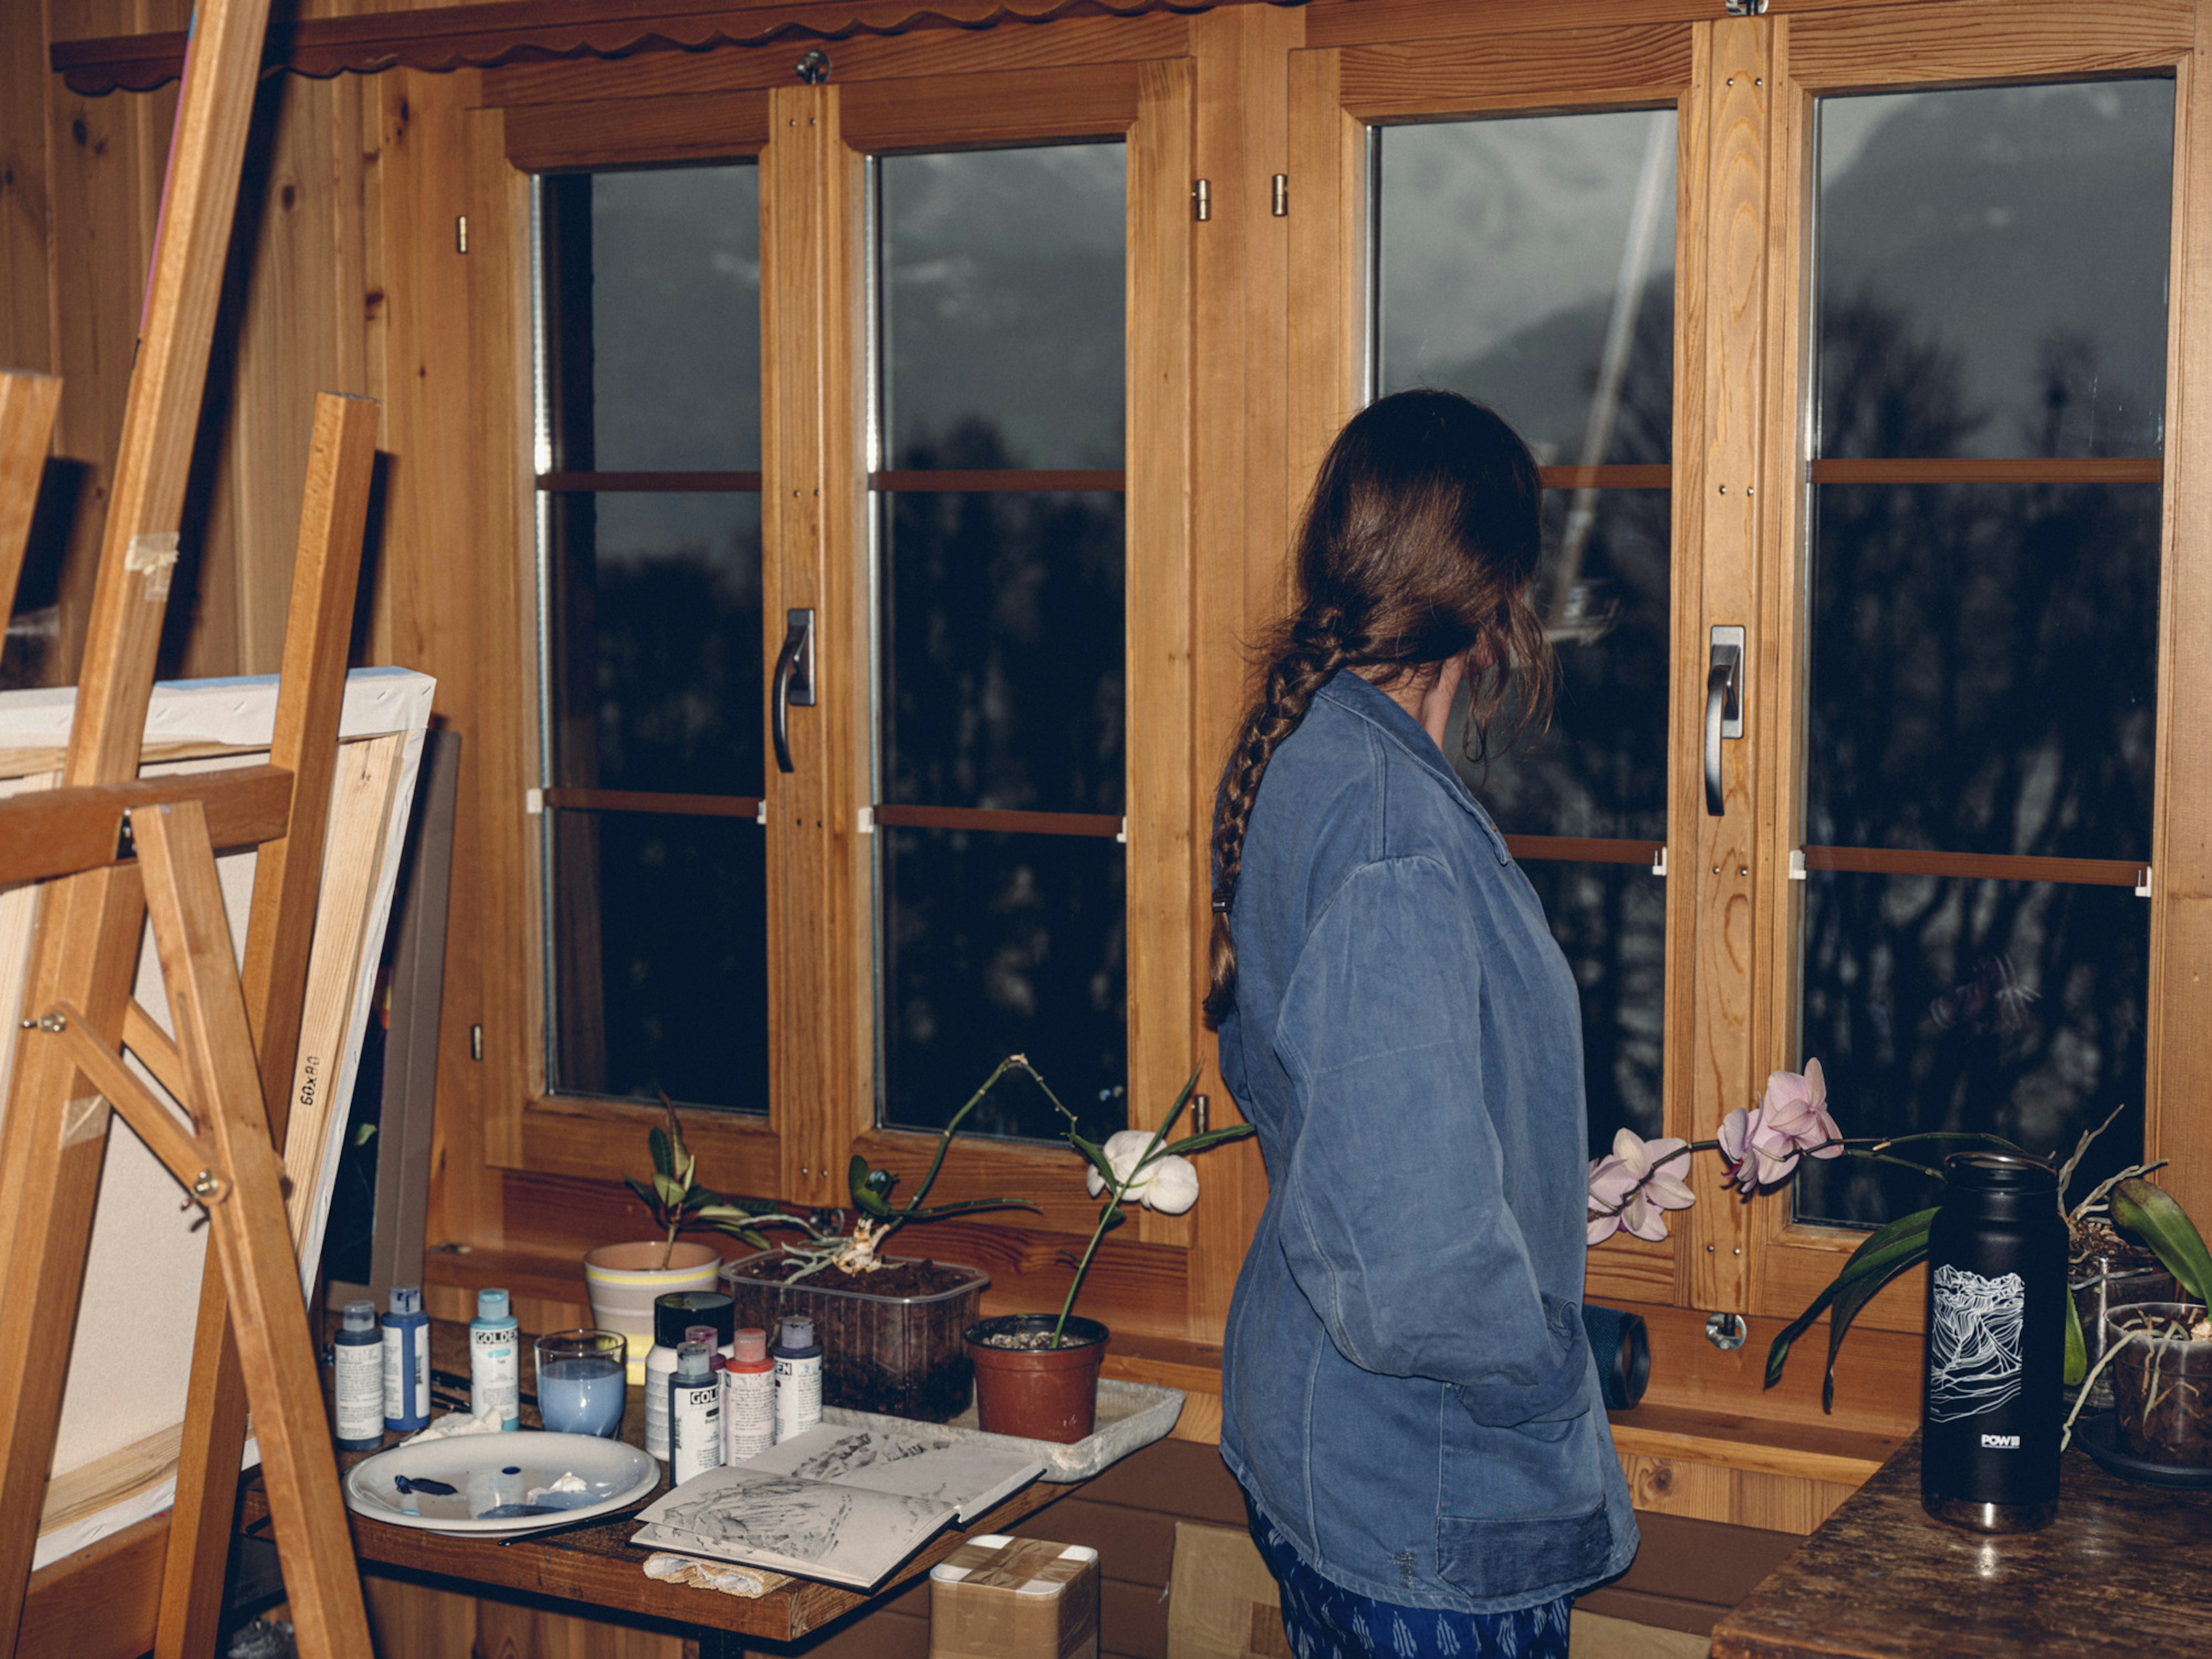 Corinne Wiedman in front of a window with painting supports.